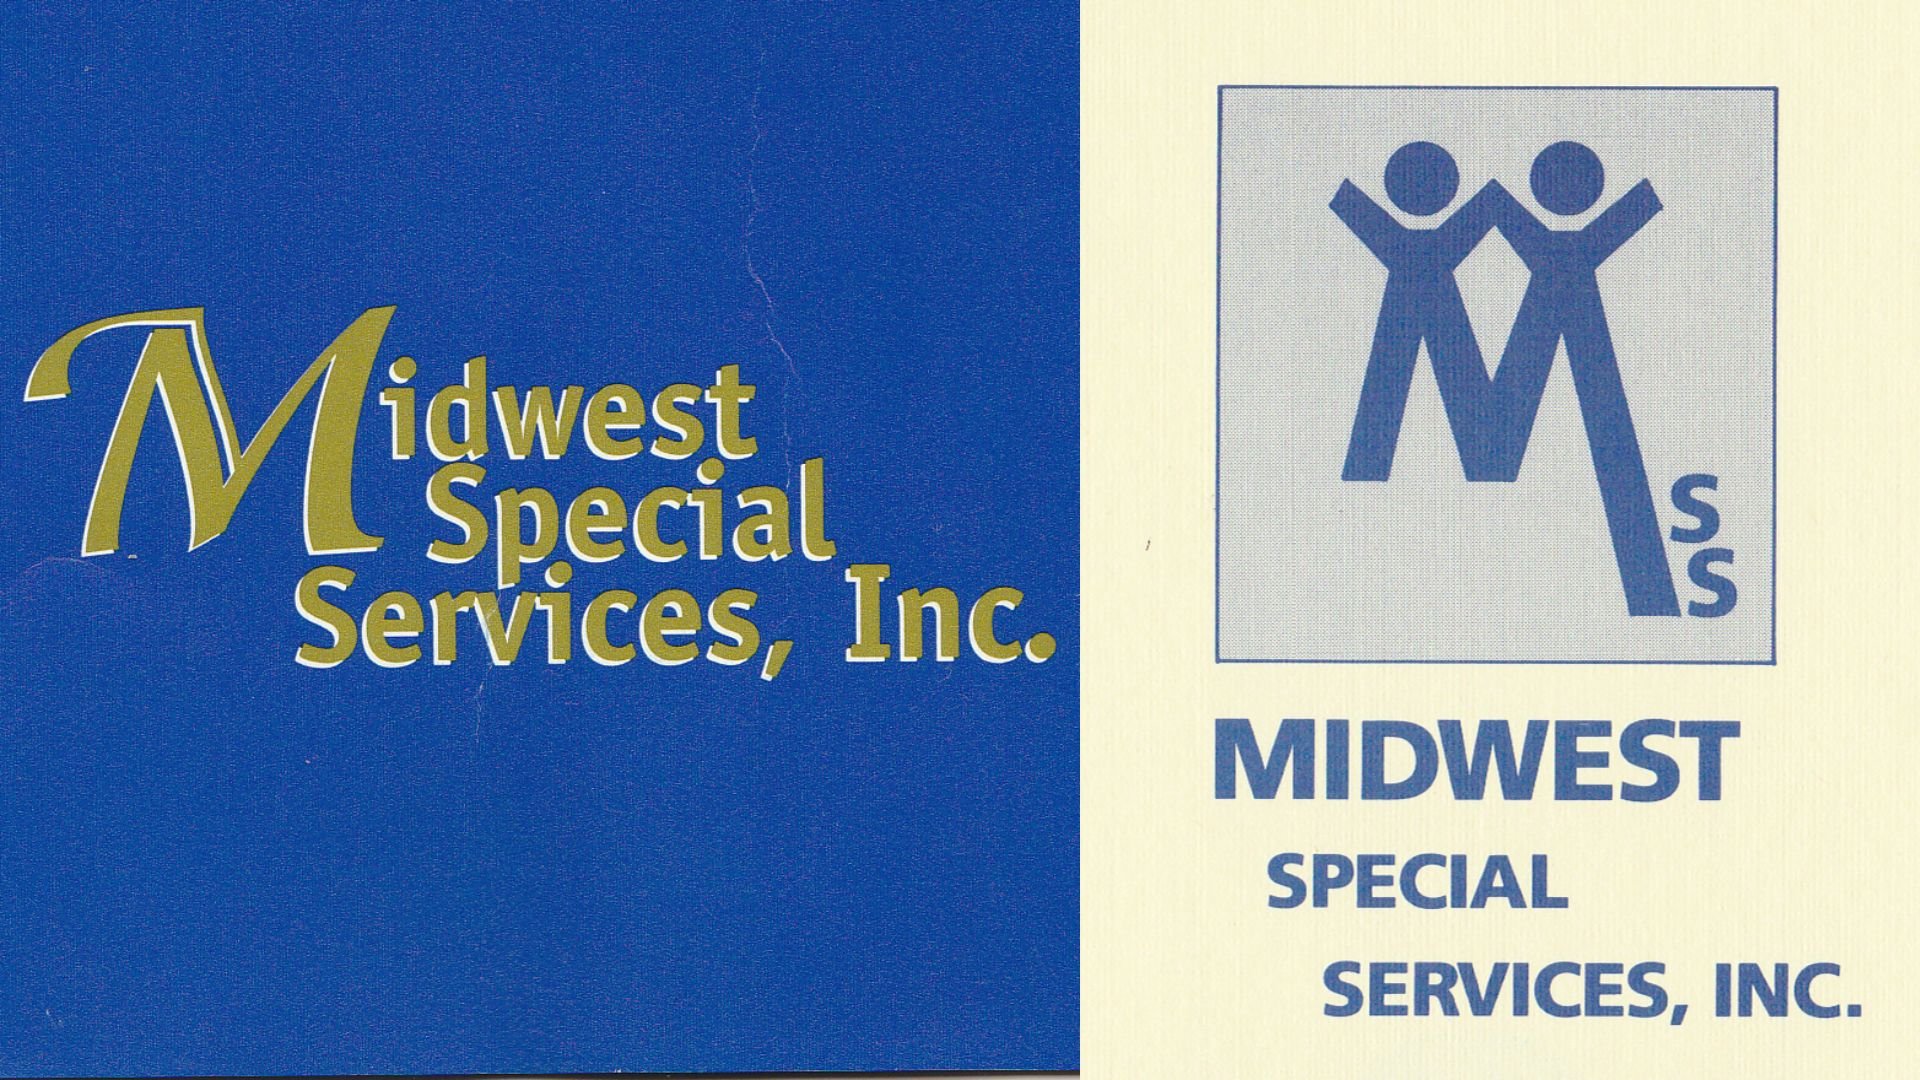  Marketing materials for Midwest Special Services, Inc., 1980s. 